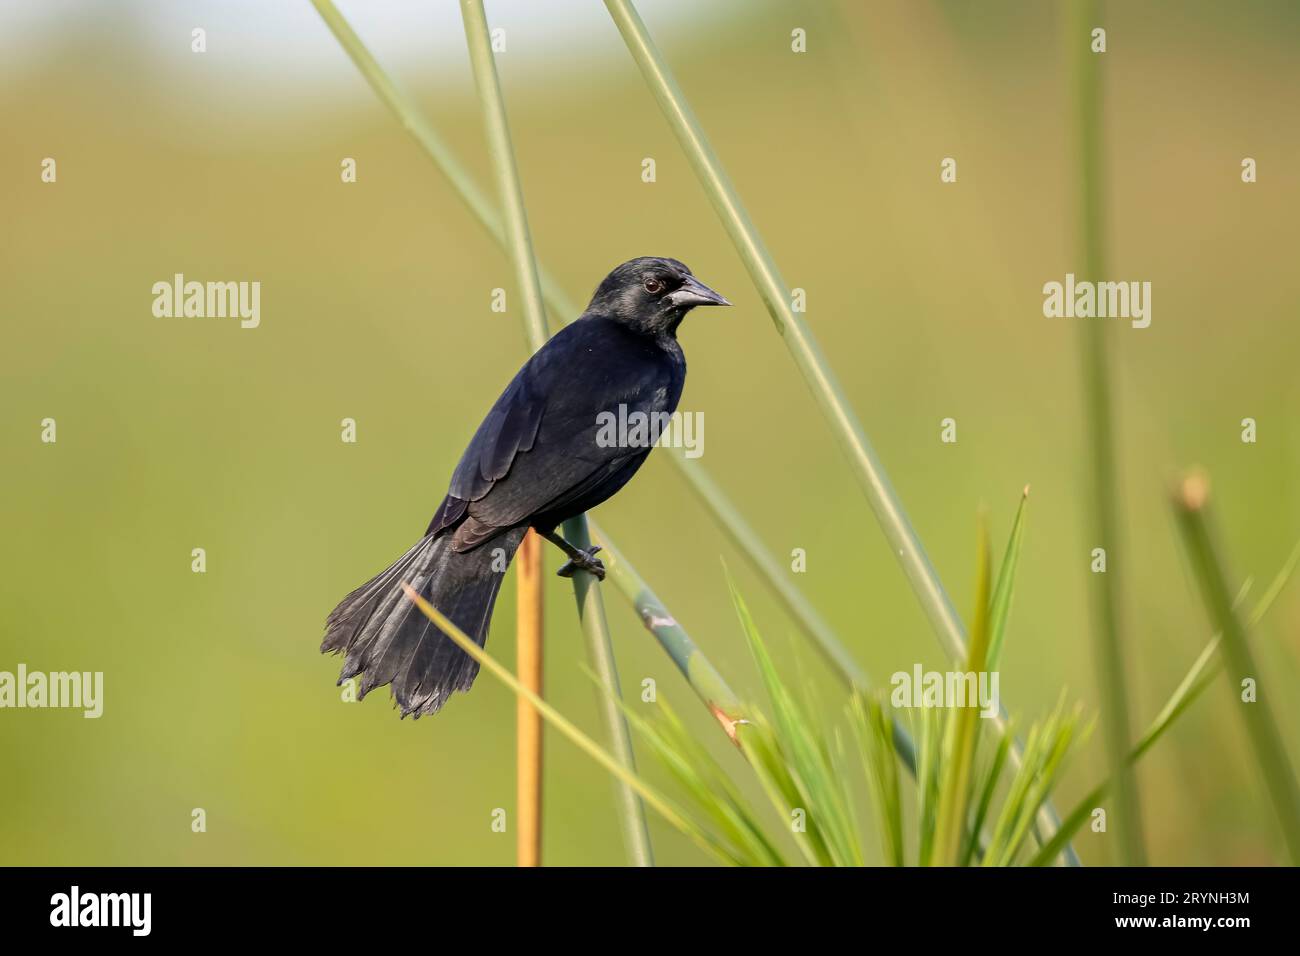 Chopi Blackbird perched on a reeds stalk against green background, Pantanal Wetlands, Mato Grosso, B Stock Photo